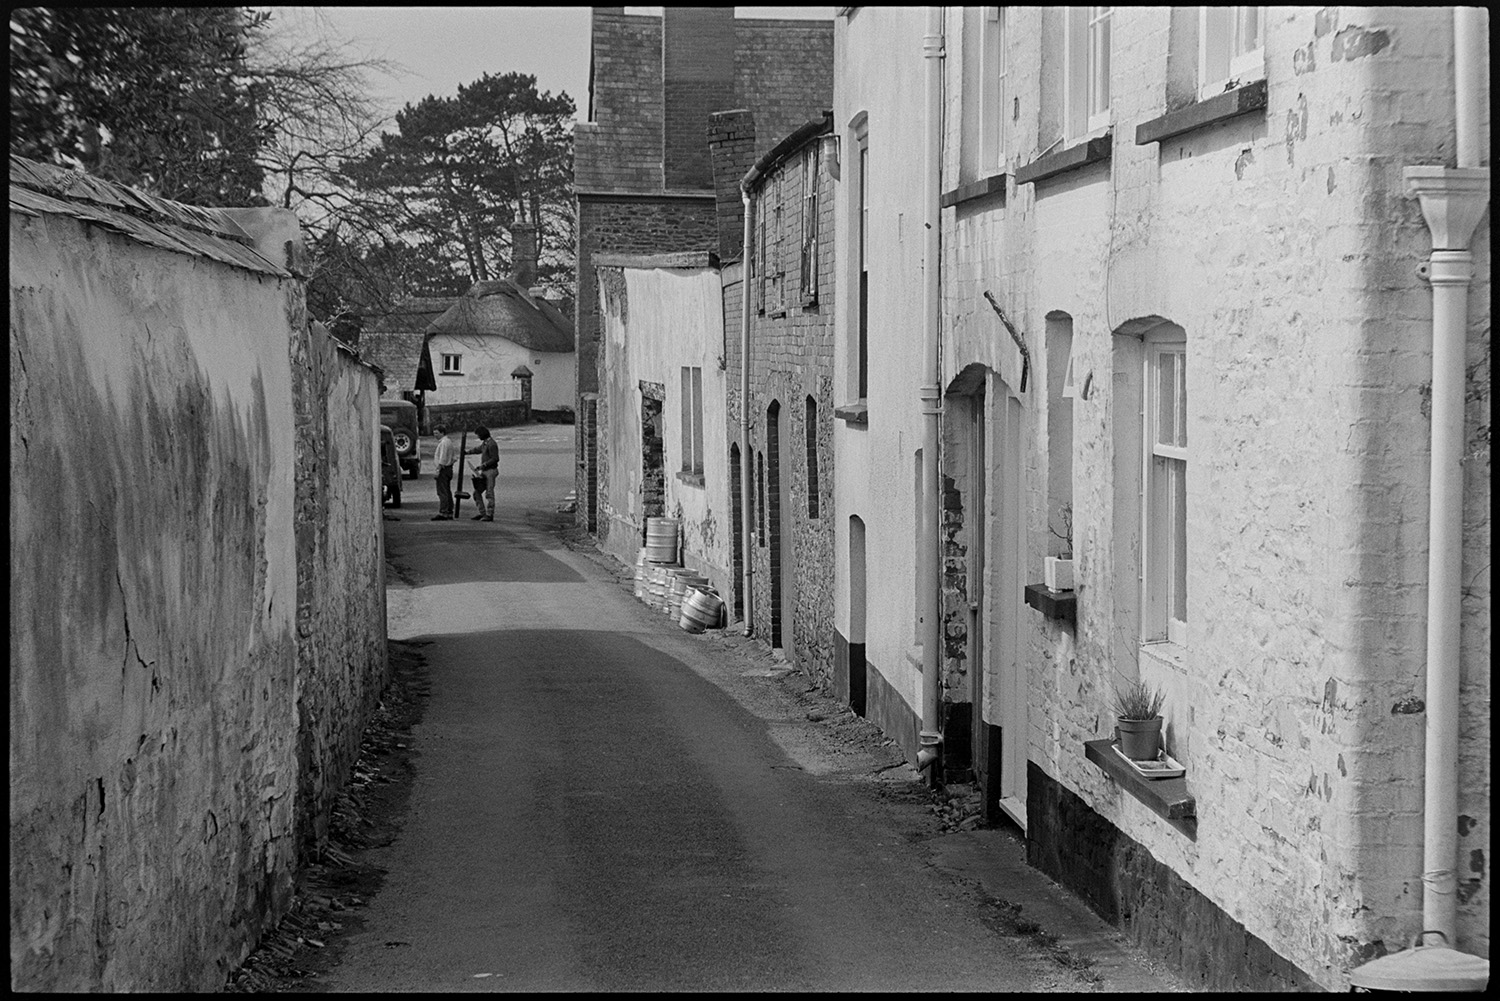 Street scene with parked motor bikes.
[A narrow street near the church and the old school at Chulmleigh. There are metal beer barrels stacked outside a property. Two young men and parked vehicles are at the end of the street, with a thatched house, railings, and tall fir trees in the background.]